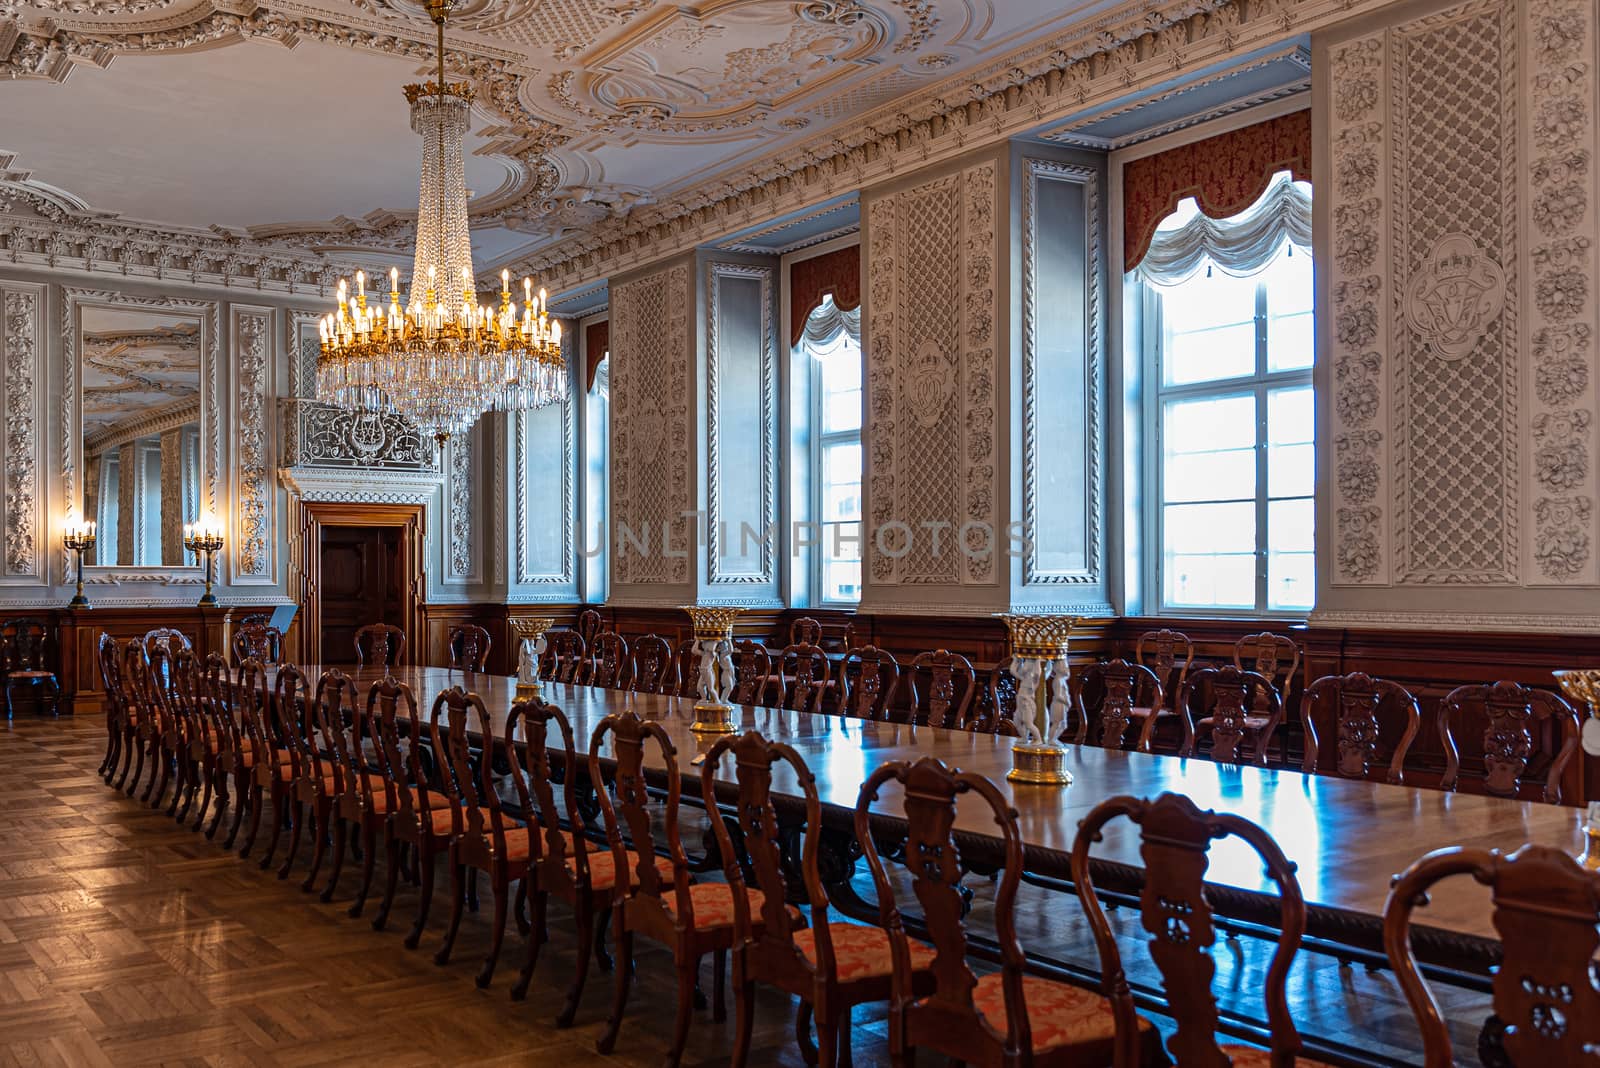 Interiors of the royal halls in the Christiansborg Palace in Copenhagen, Denmark, large antique table and crystal chandelier